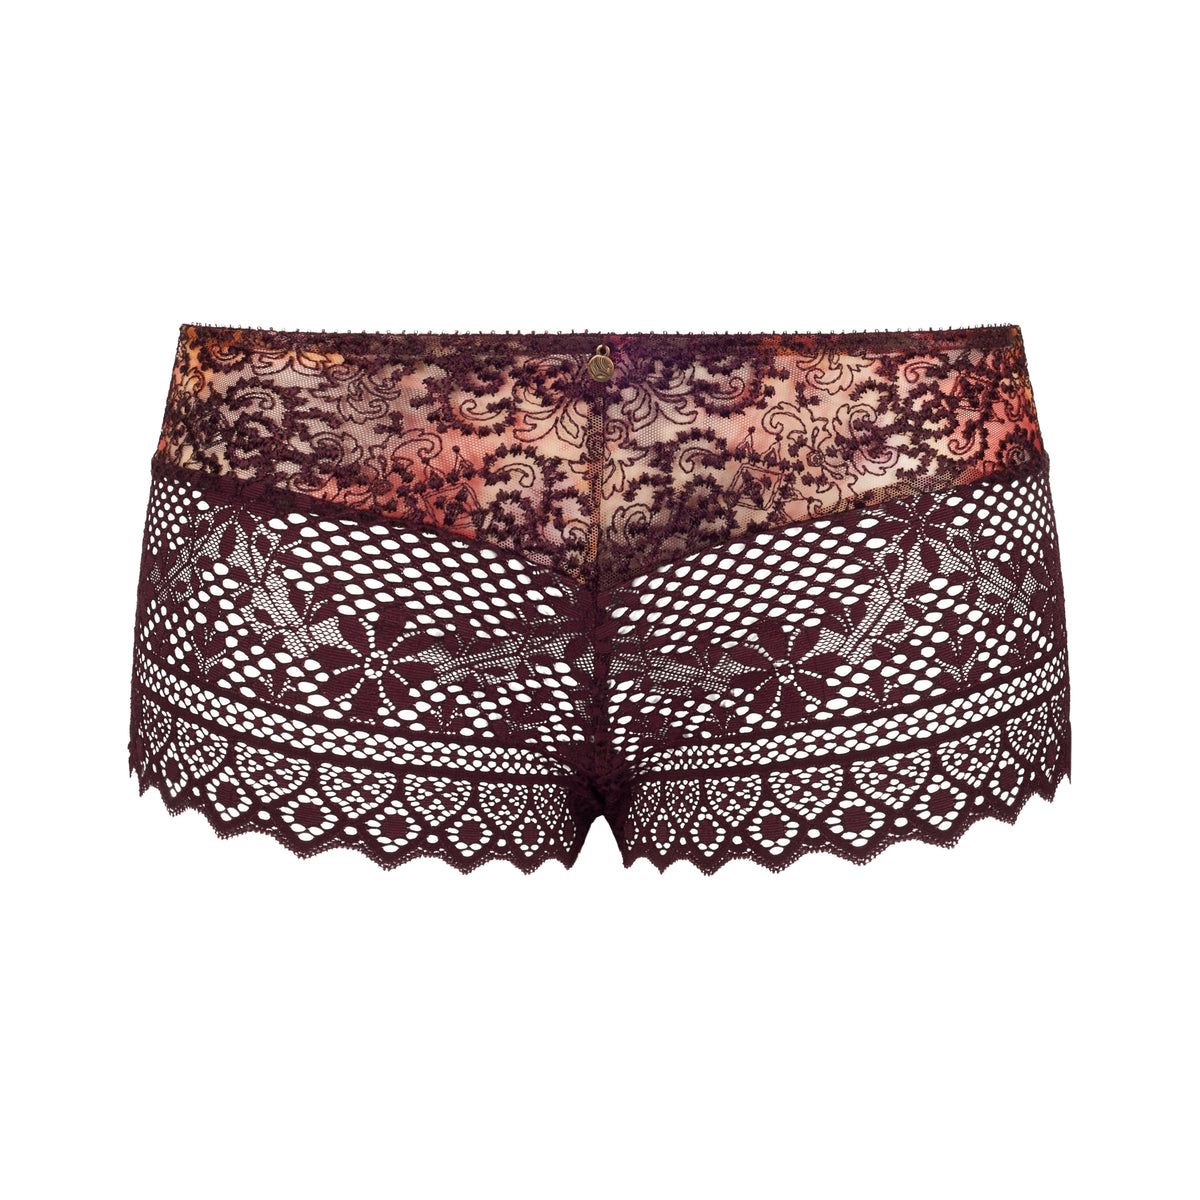 Cassiopee Henne Short